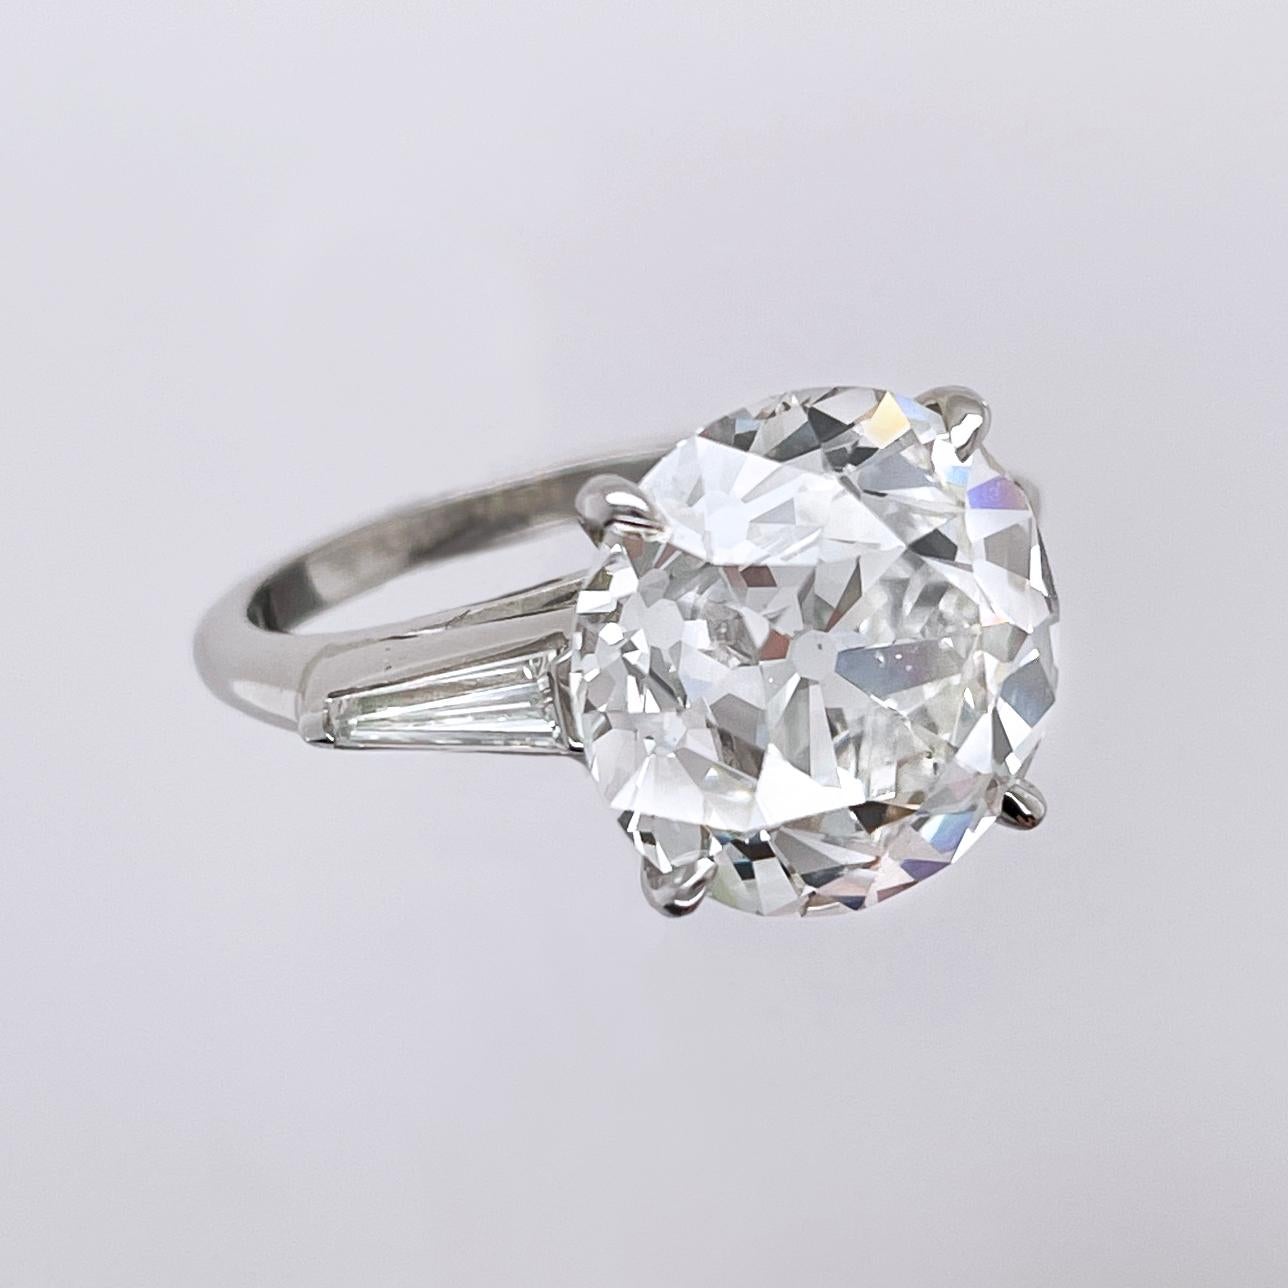 An old European cut diamond is a round diamond primarily cut between 1890-1930. Vintage diamonds, such as old Europeans and old miner cuts, were hand cut to increase color, rather than brilliance. The resulting stones capture light differently,